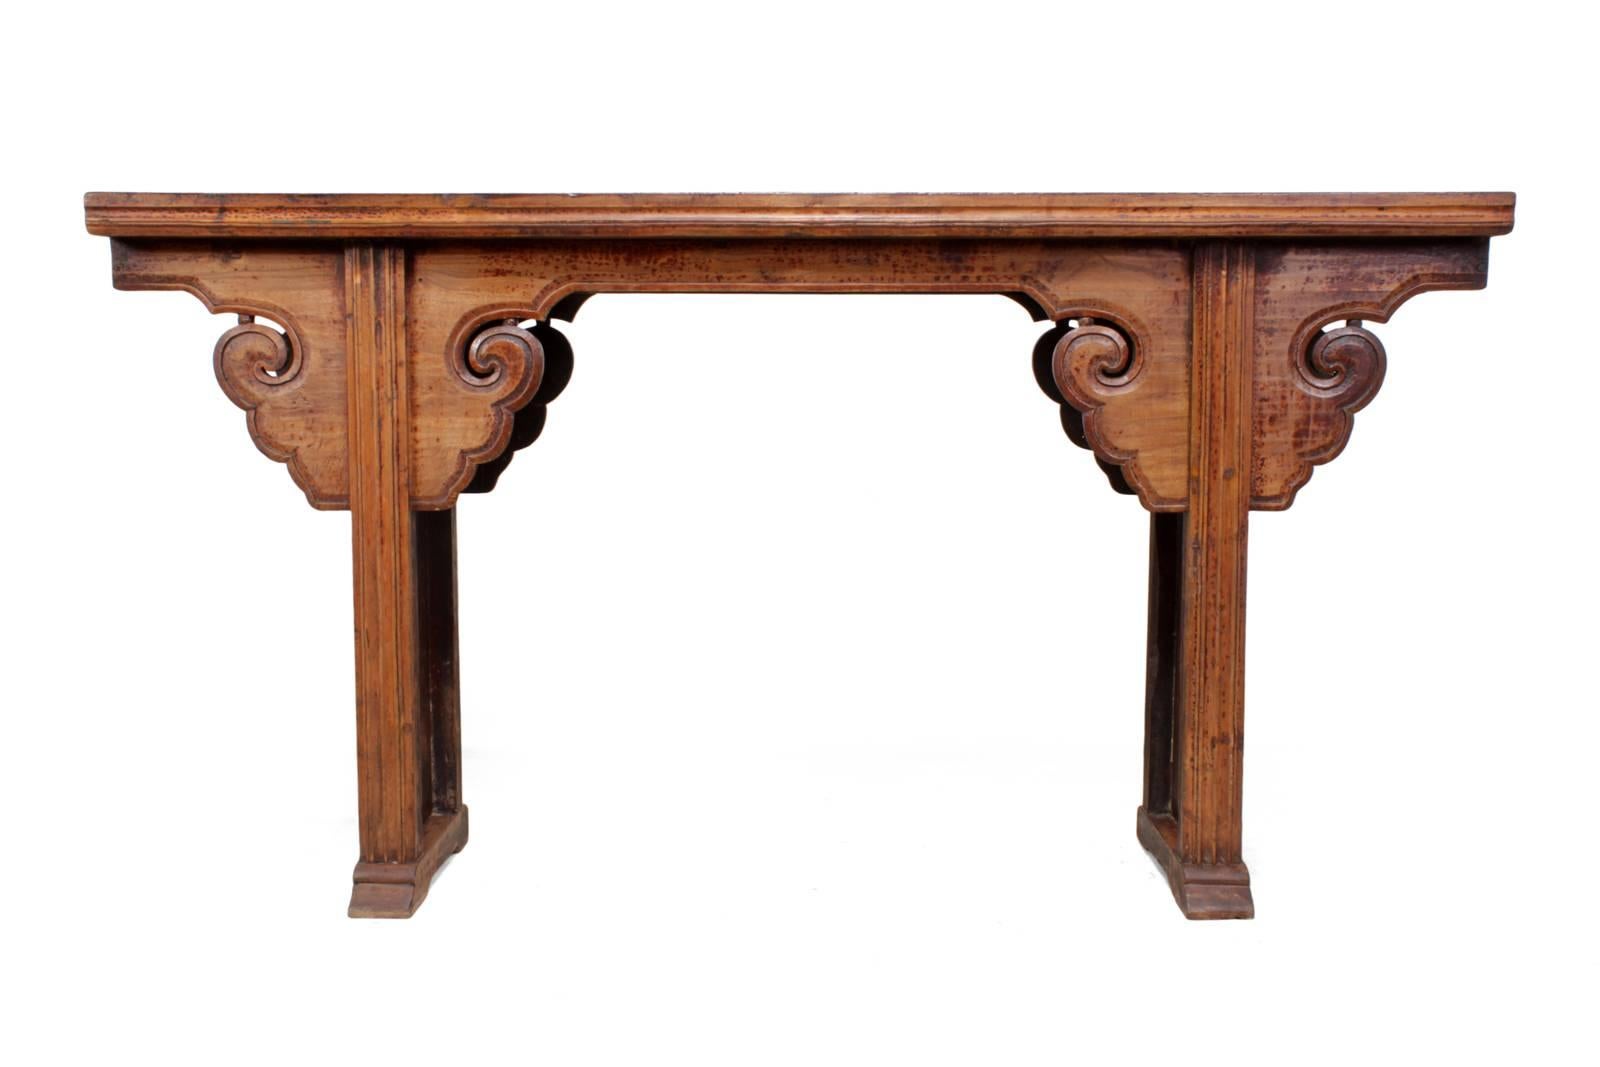 Early 19th Century Pair of Elm Alter Tables from Northern China, circa 1820